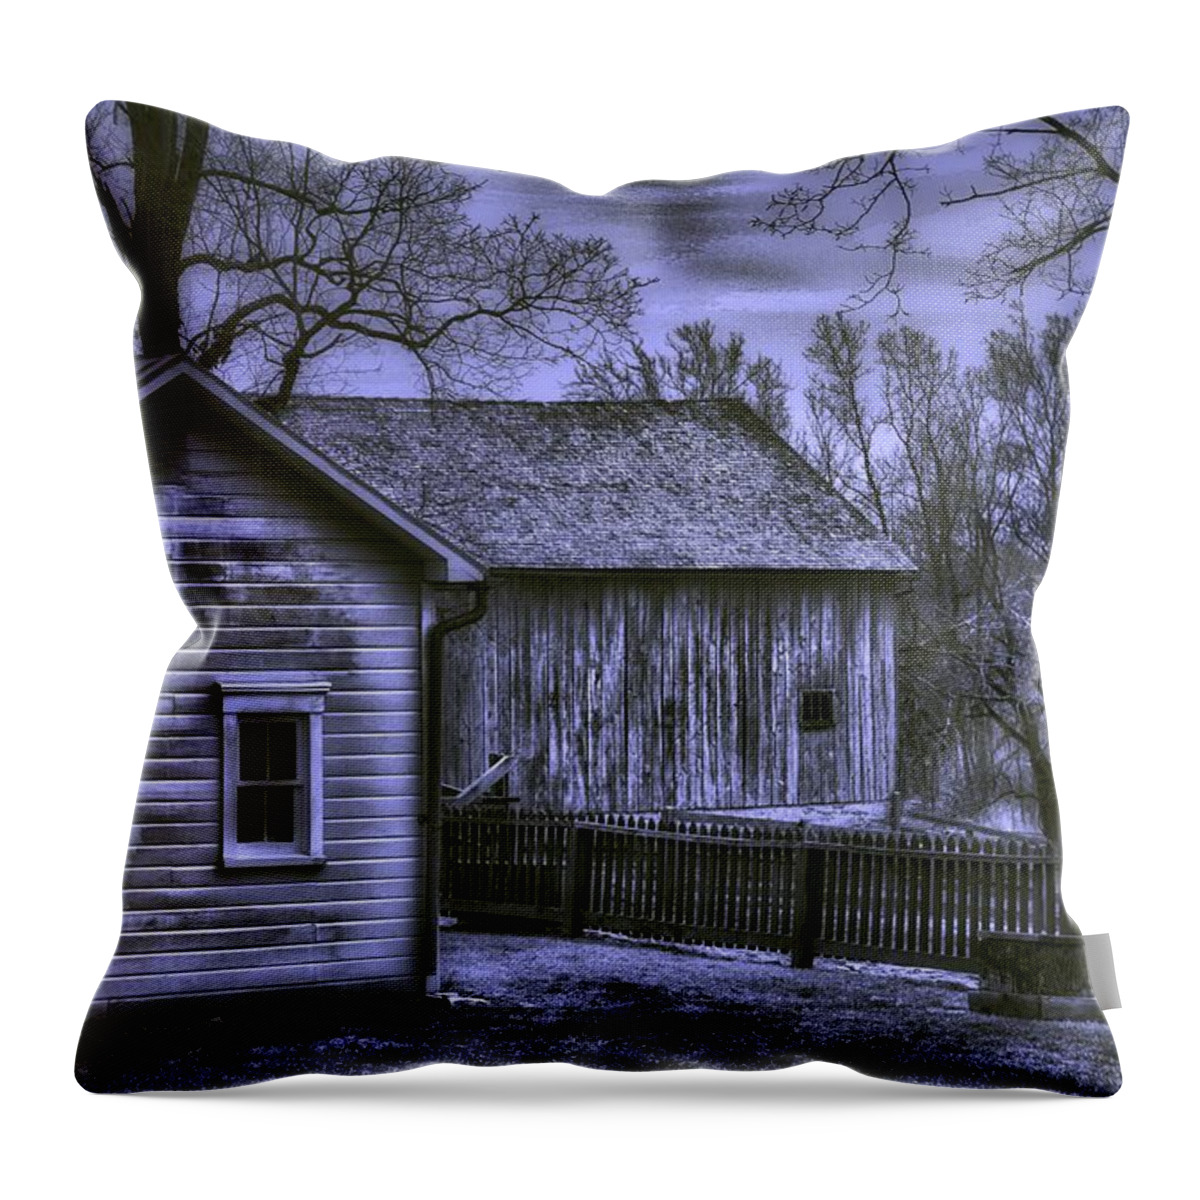  Throw Pillow featuring the photograph Humble Homestead by Jack Wilson